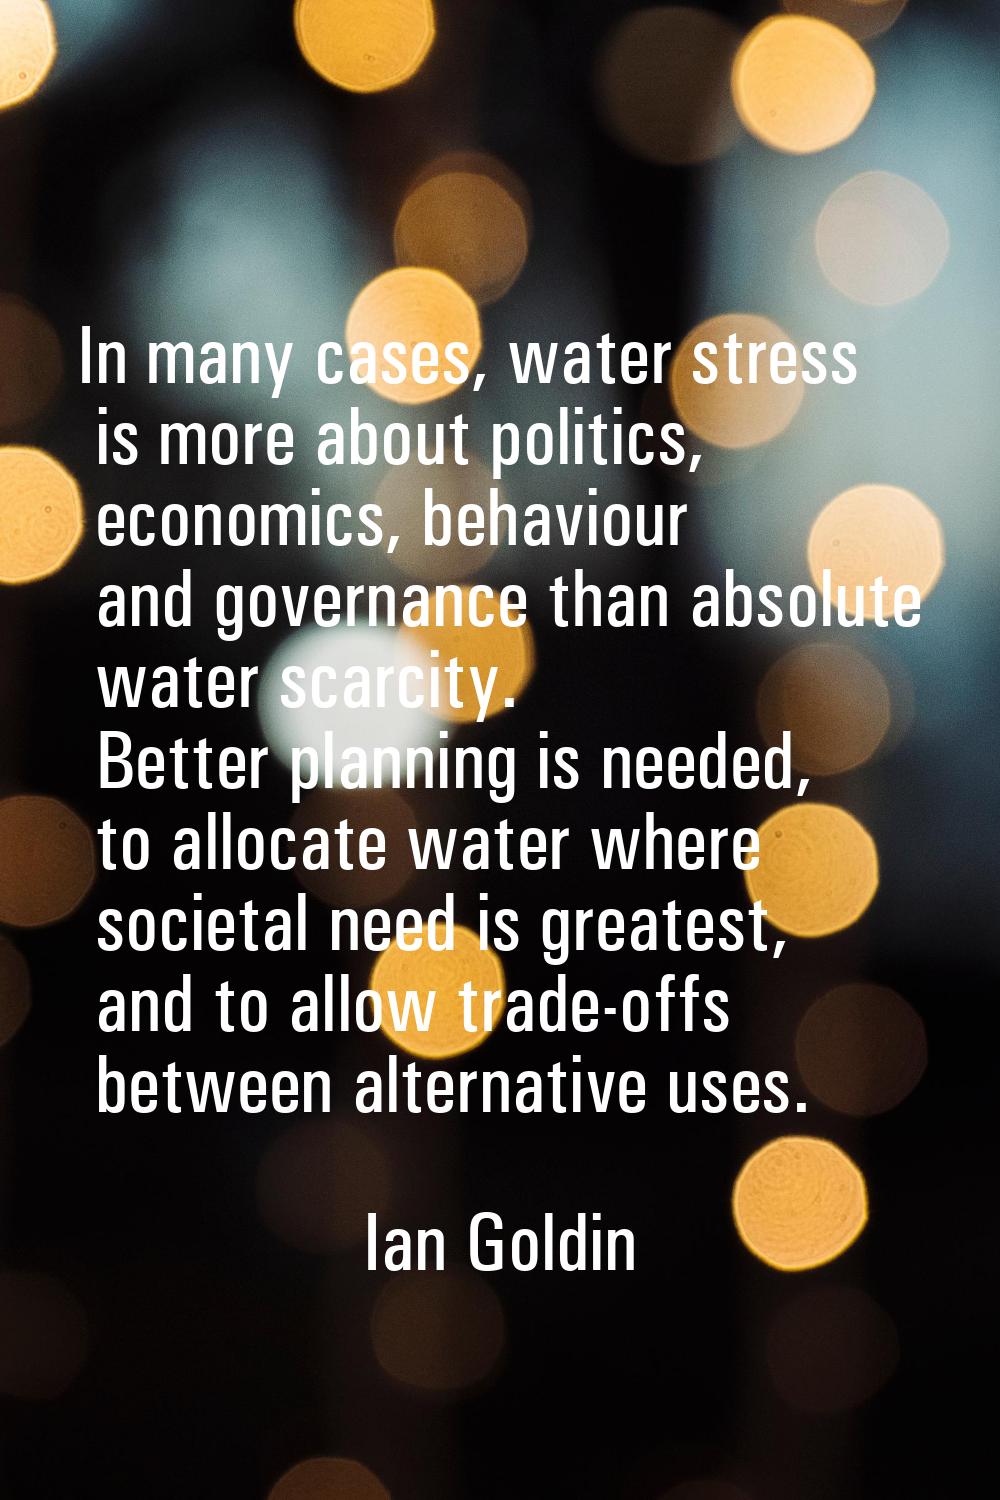 In many cases, water stress is more about politics, economics, behaviour and governance than absolu